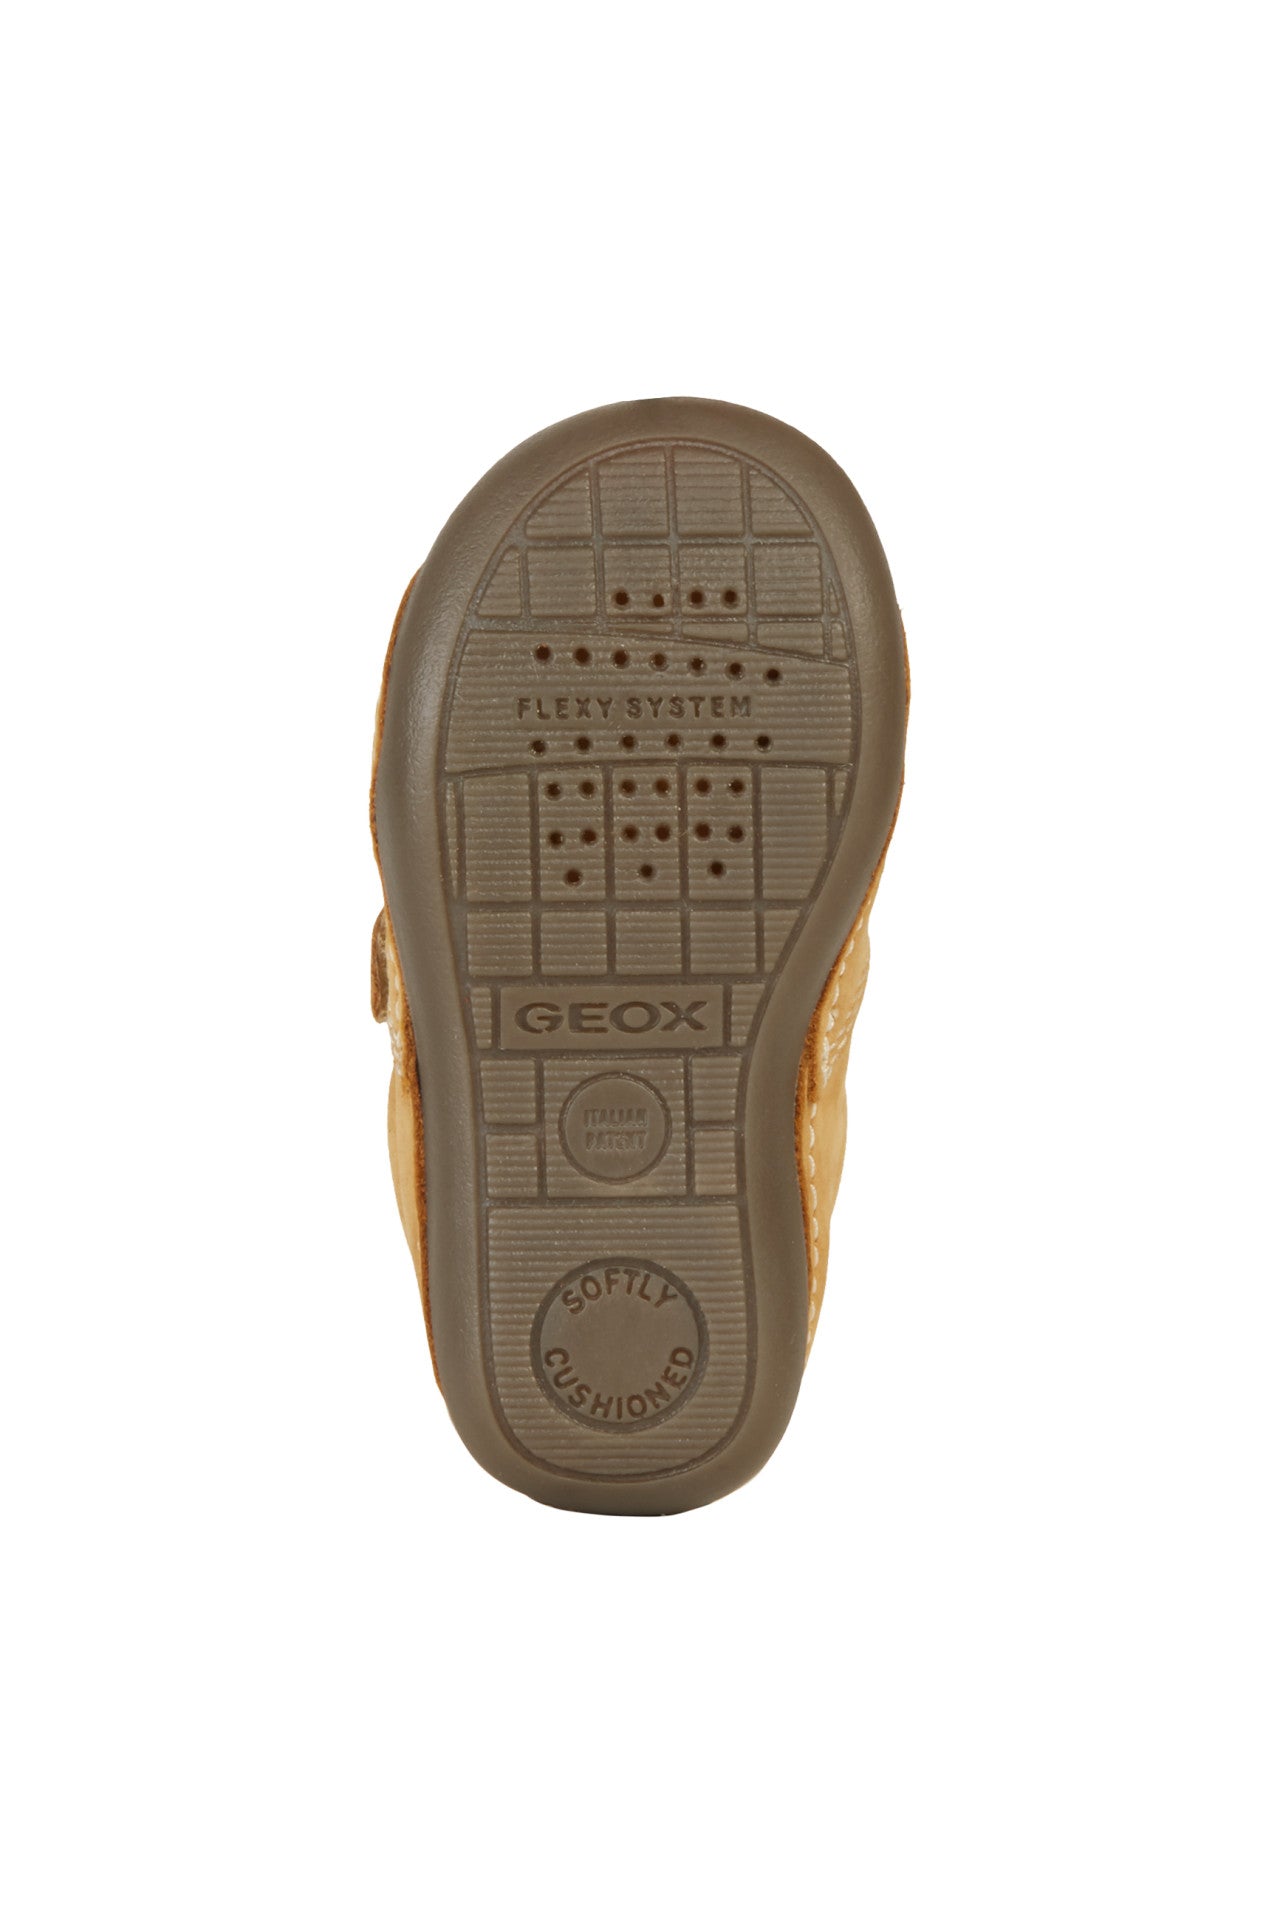 Boys pre walkers by Geox, style B Tutim, in light tan nubuck leather with double velcro fastening. Sole view.